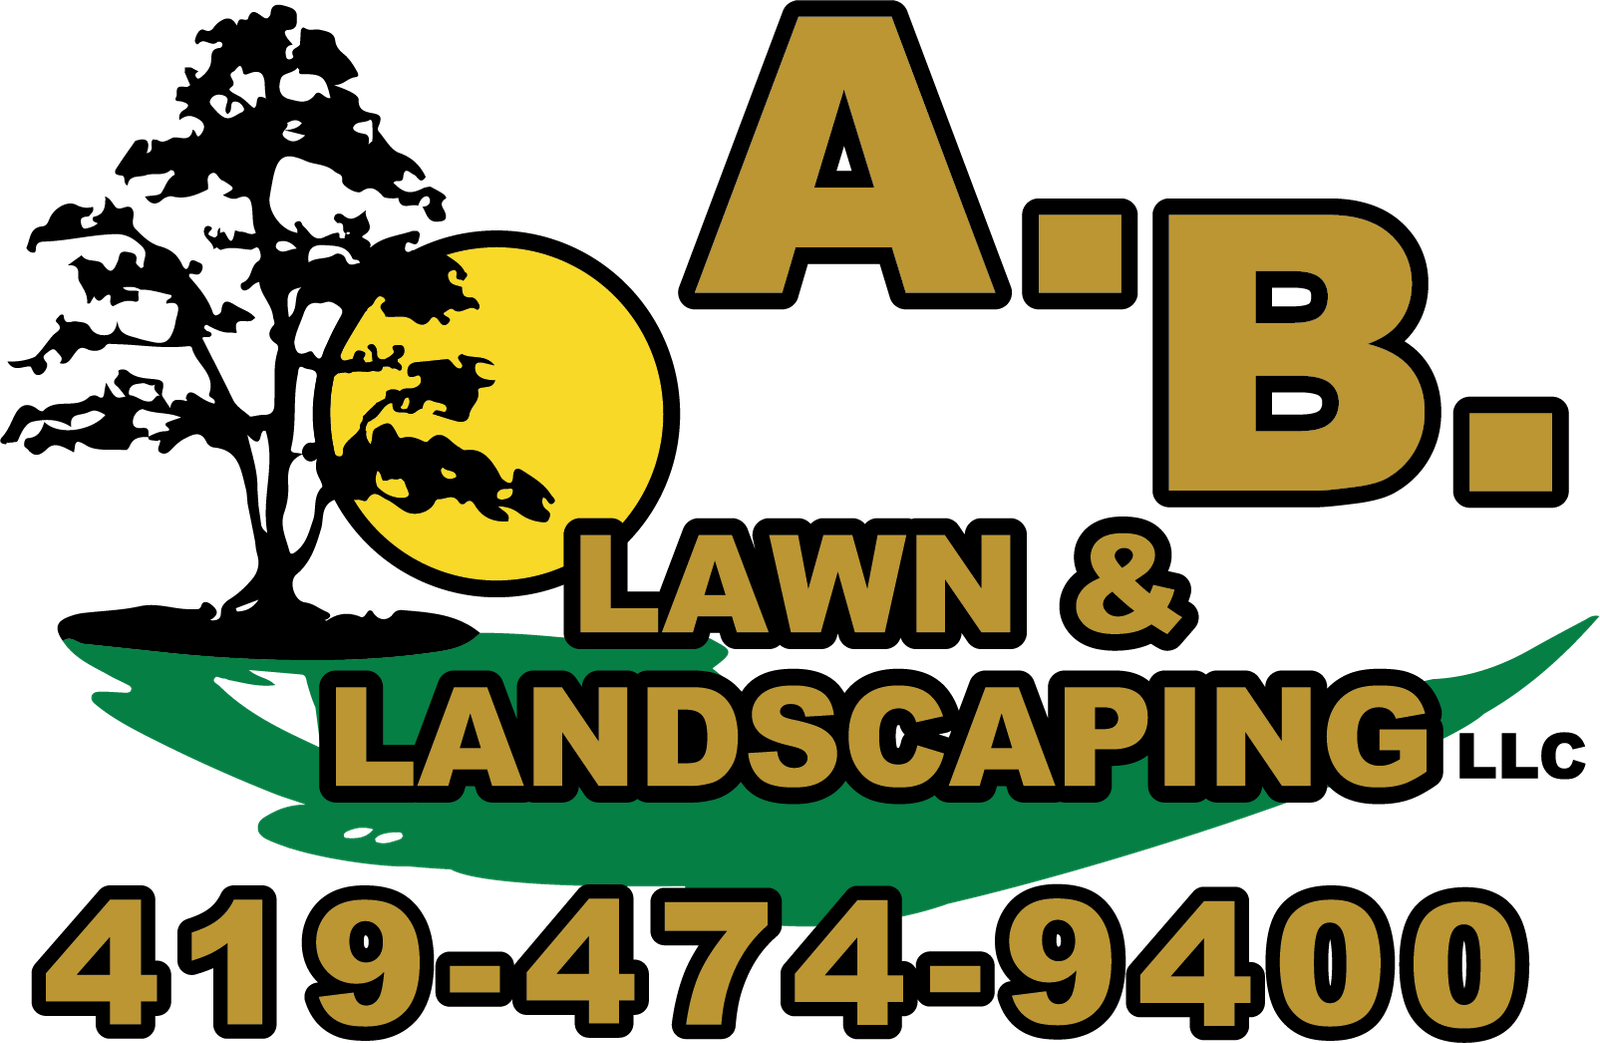 AB Lawn & Landscaping